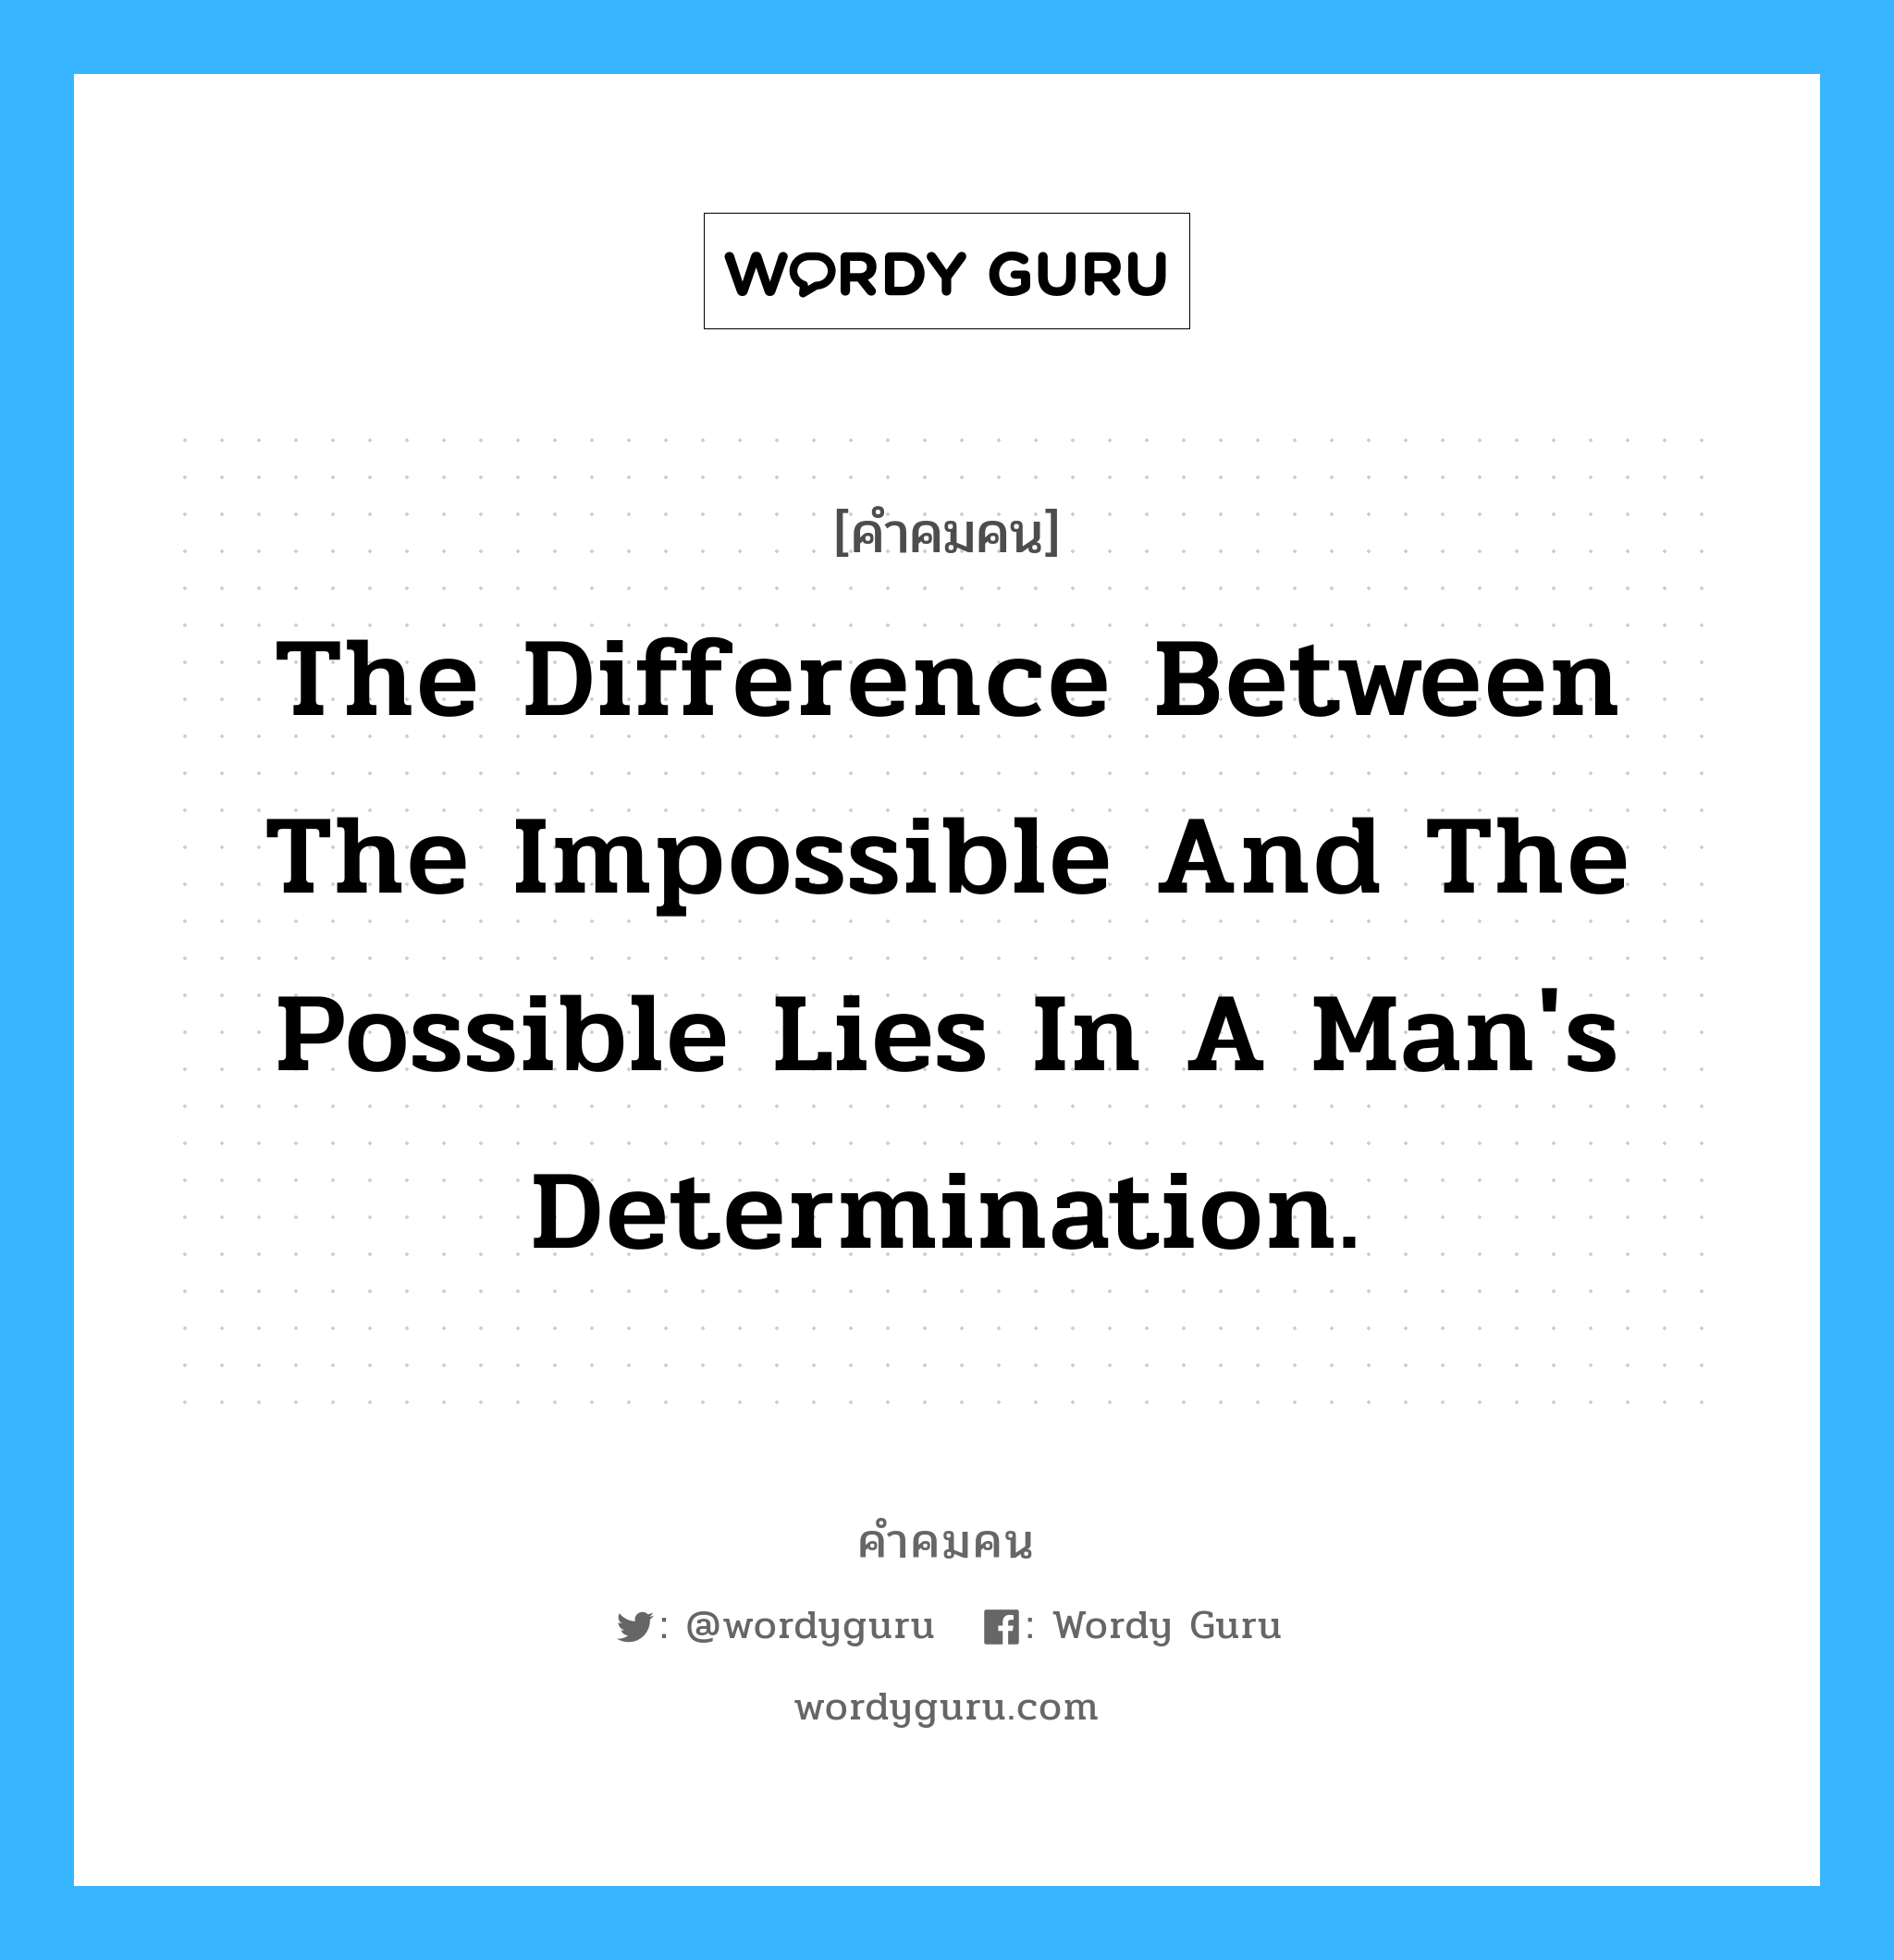 The difference between the impossible and the possible lies in a man's determination. อยู่ในกลุ่มประเภท Tommy Lasorda, คำคมคน The difference between the impossible and the possible lies in a man's determination. เส้นบางๆที่คั่นระหว่างความเป็นไปได้และความเป็นไปไม่ได้คือการตัดสินใจของเรา Tommy Lasorda หมวด Tommy Lasorda